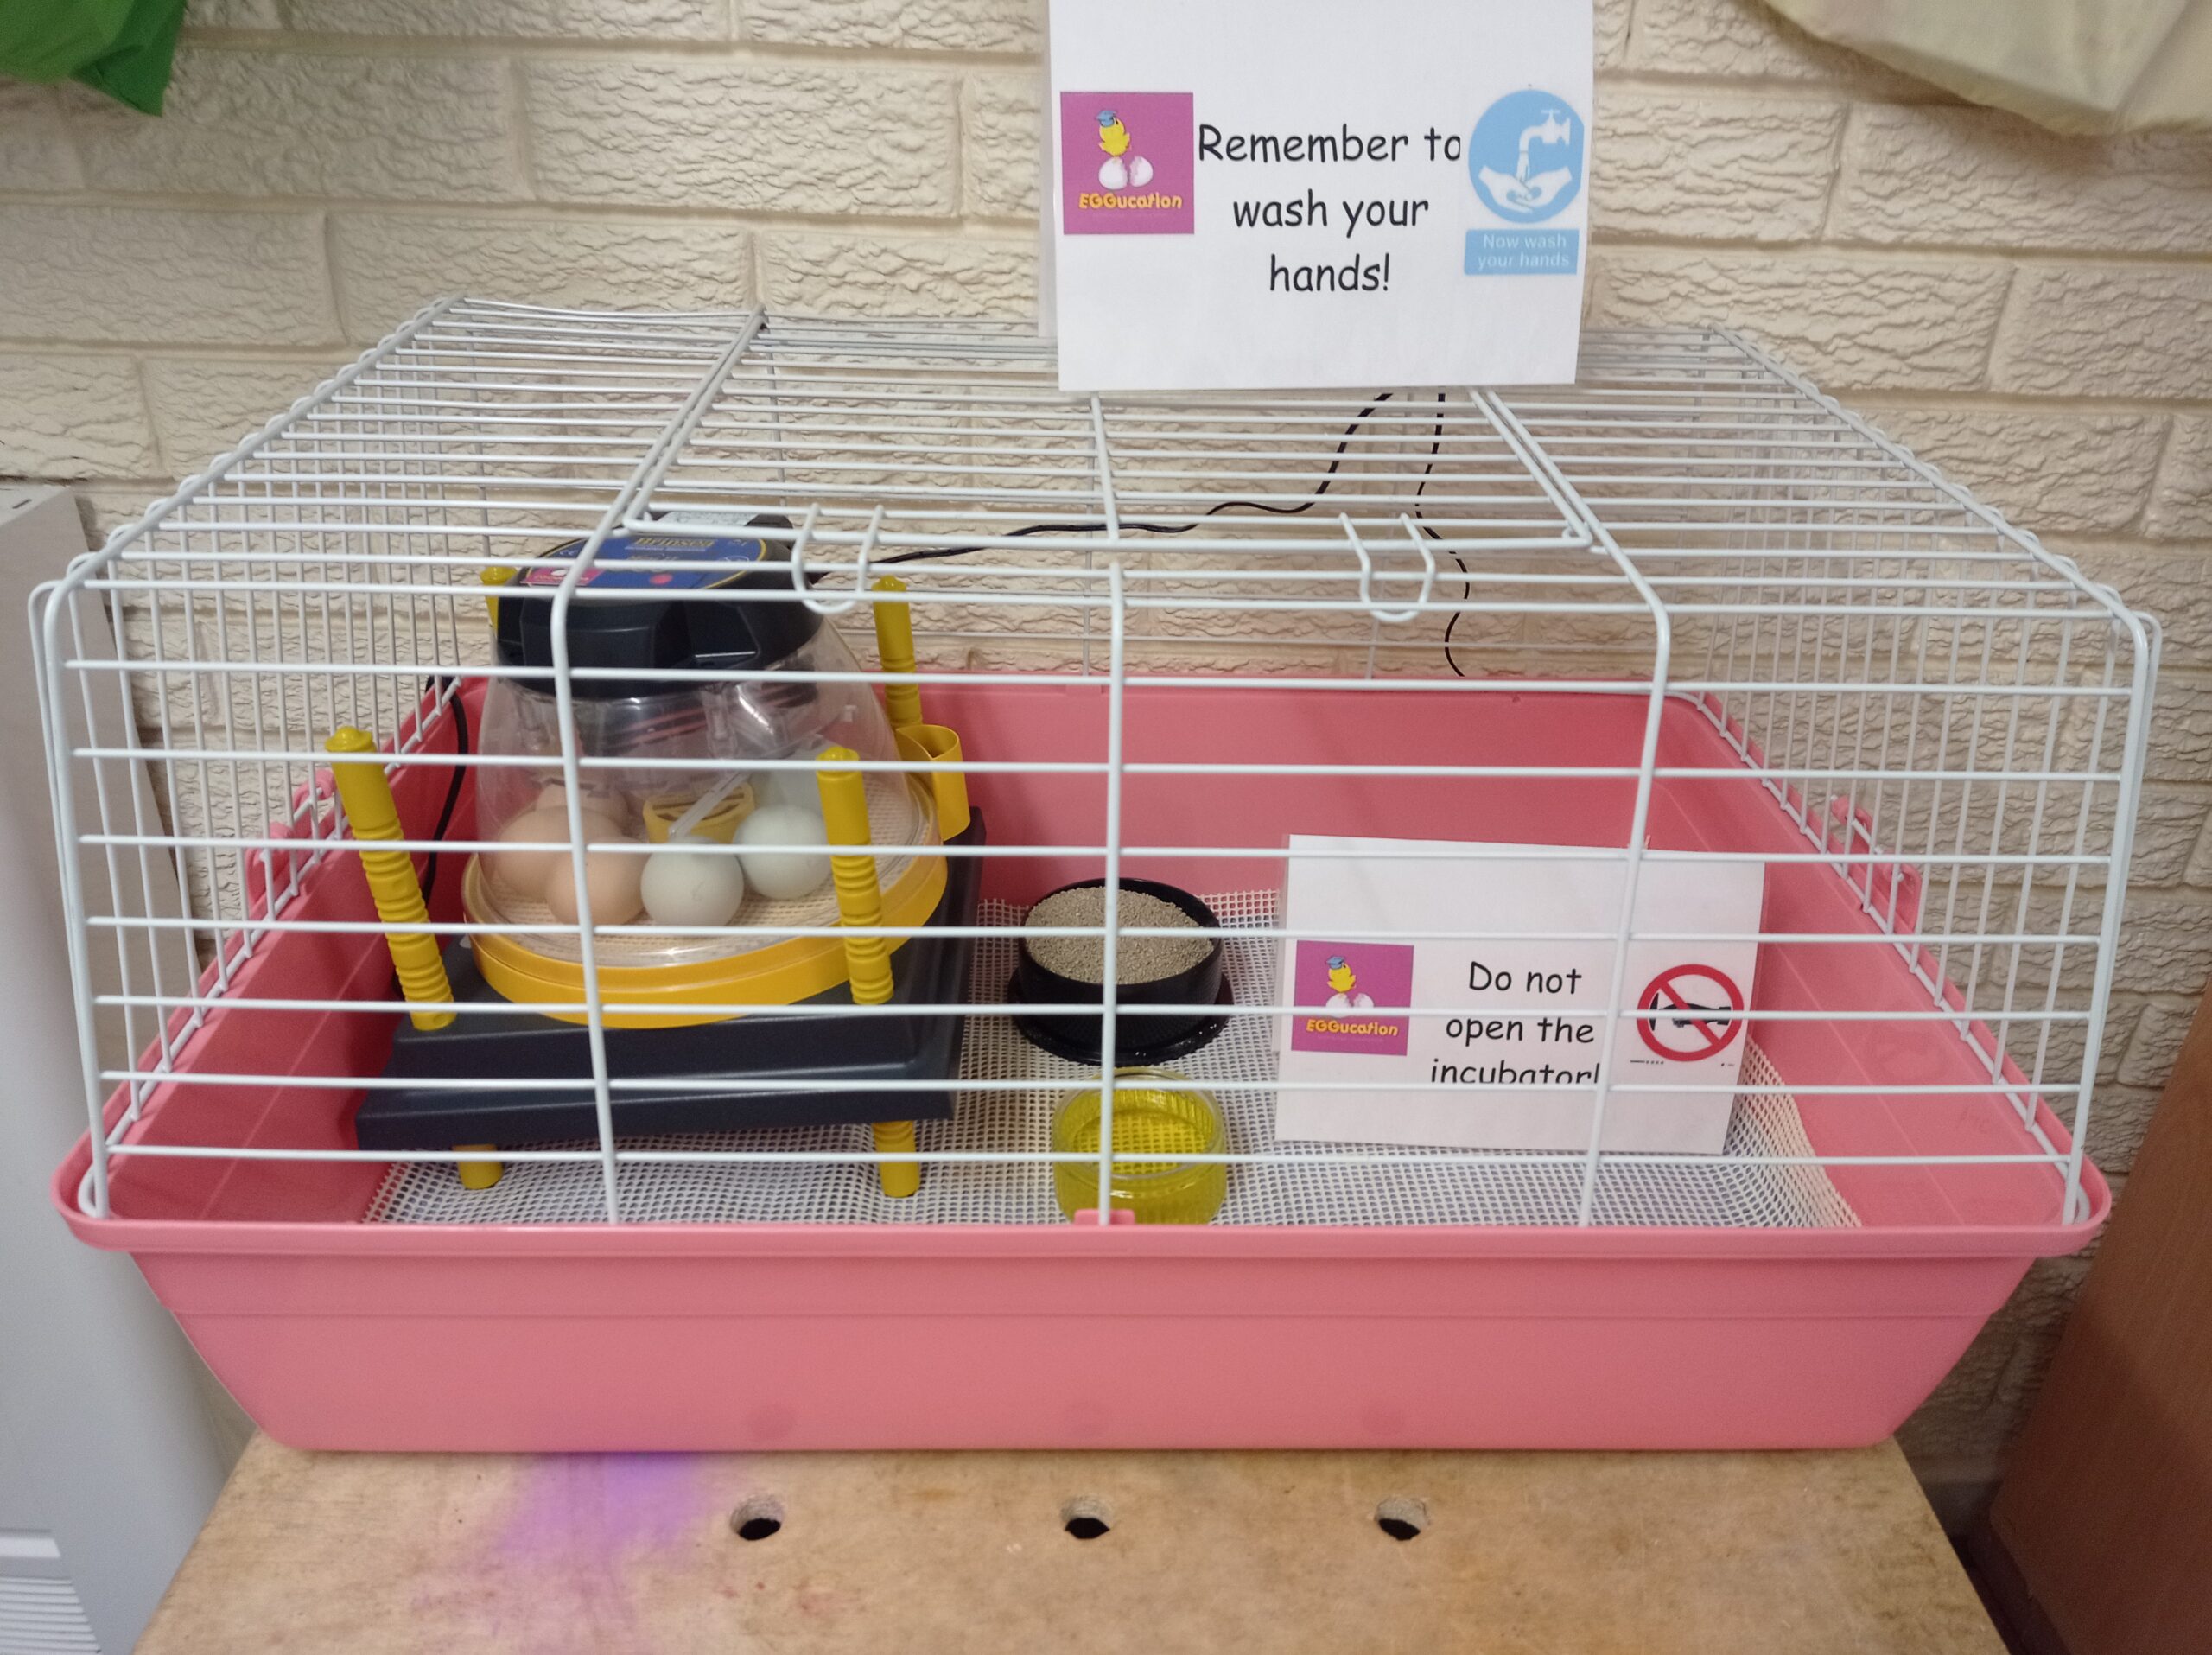 We are on chick-watch at the nursery! We are eagerly waiting for some chicks to hatch.